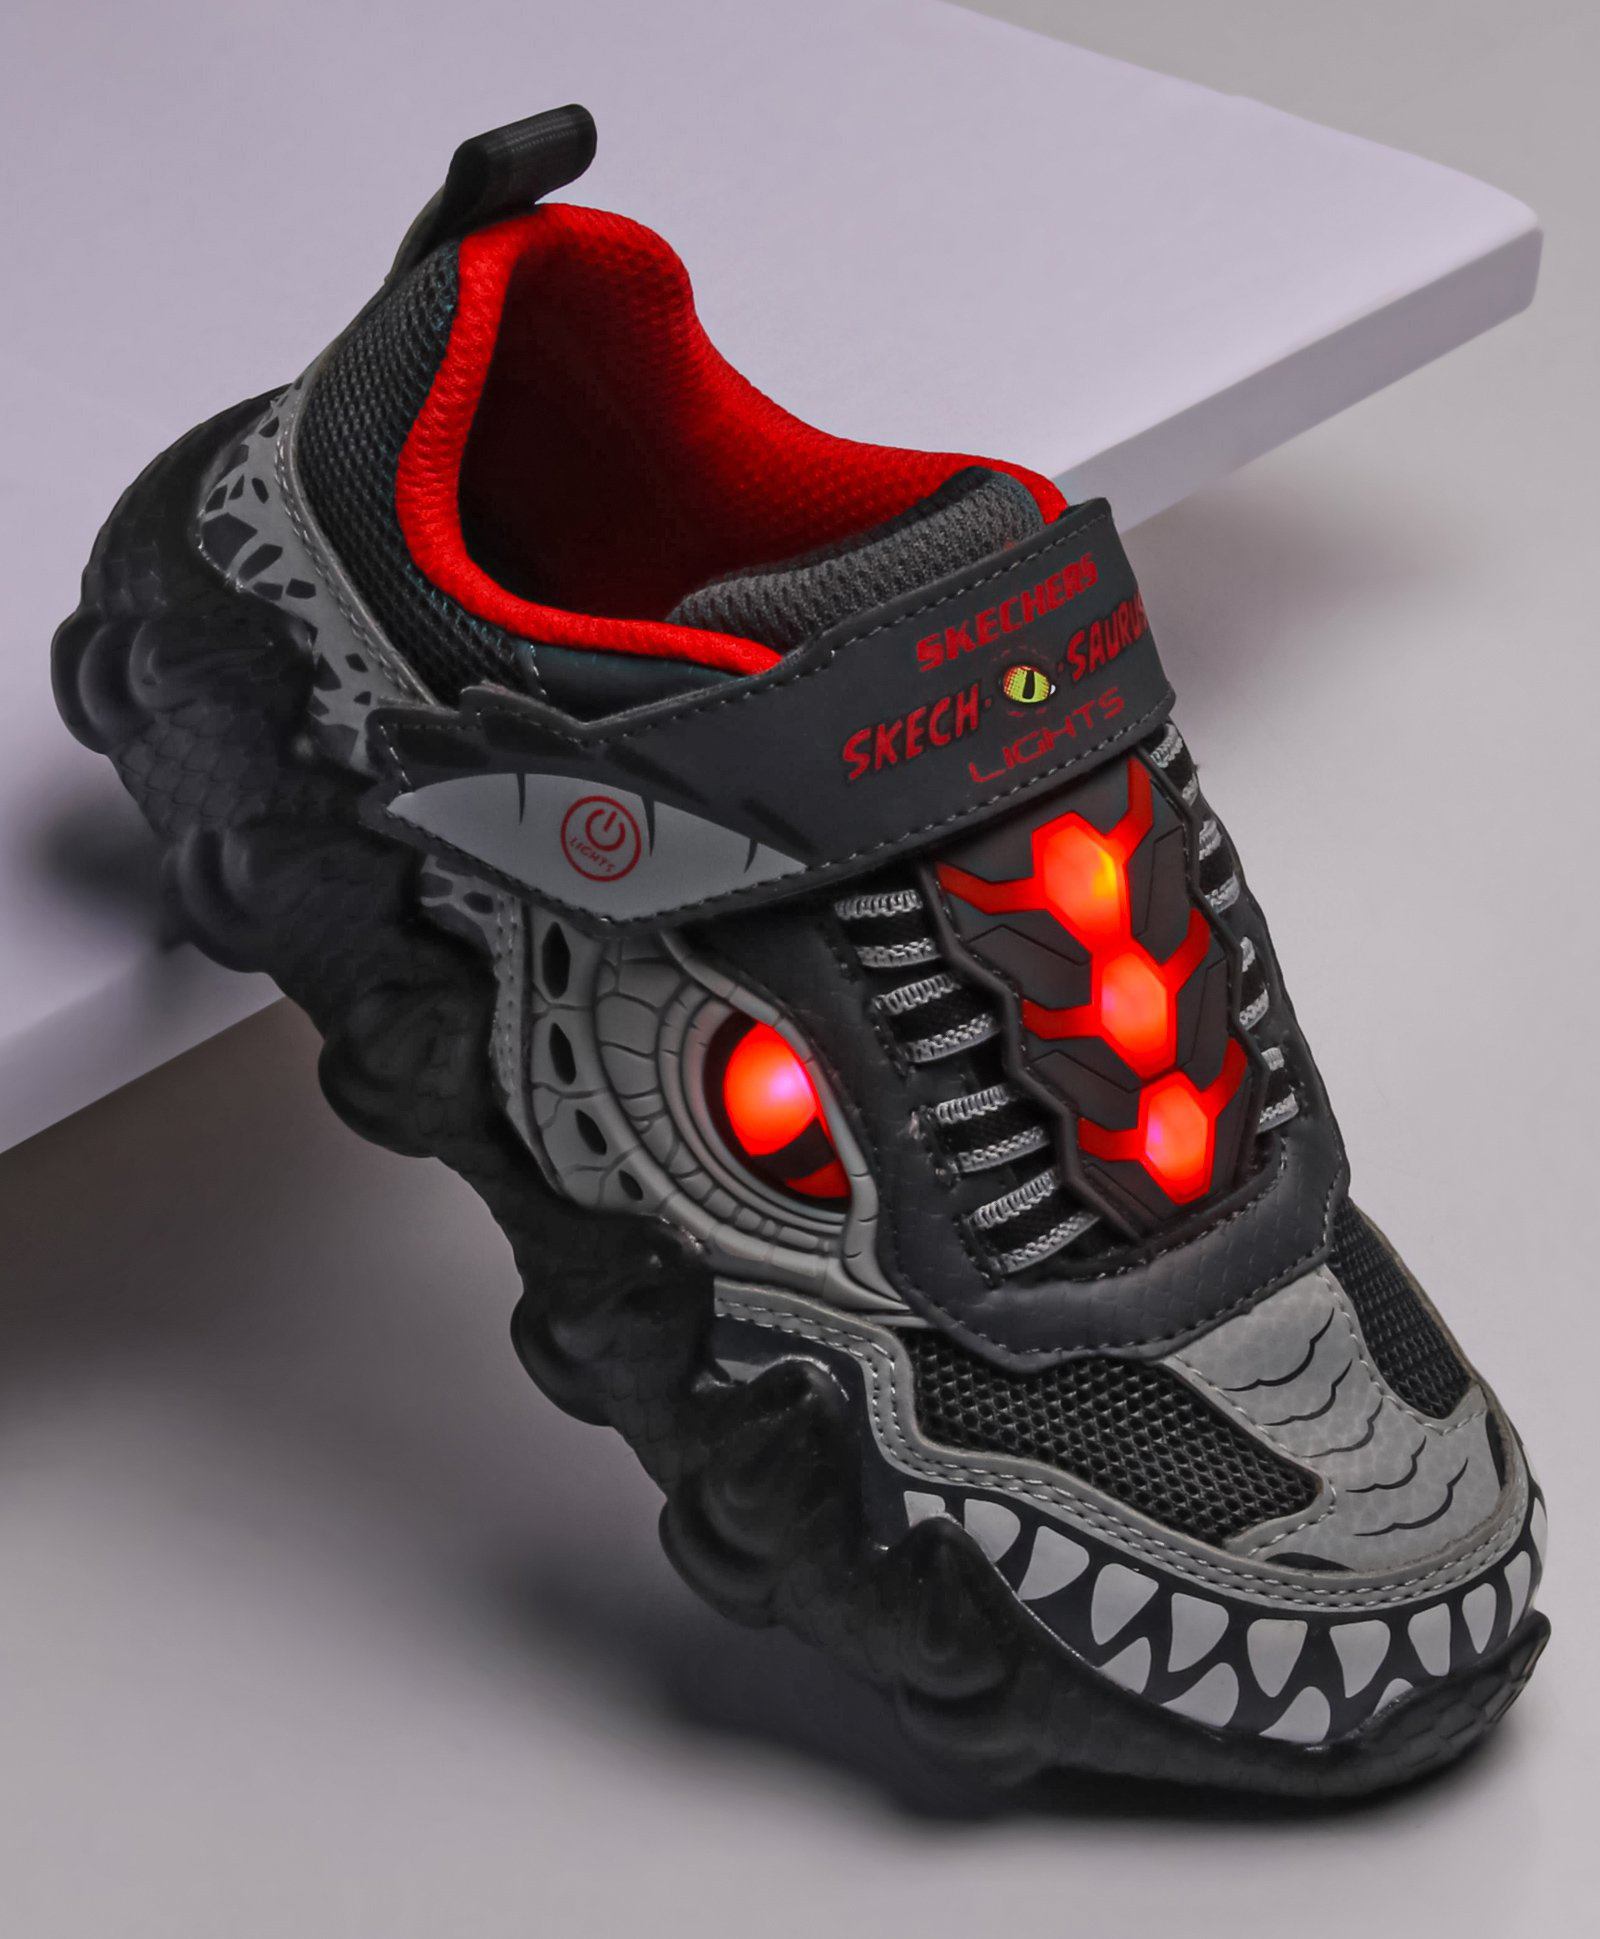 Asco Clásico astronauta Buy Skechers Skech-O-Saurus Lights Dino TR LED Shoes With Velcro Closure -  Red Black for Boys (5-6 Years) Online, Shop at FirstCry.com - 12595741